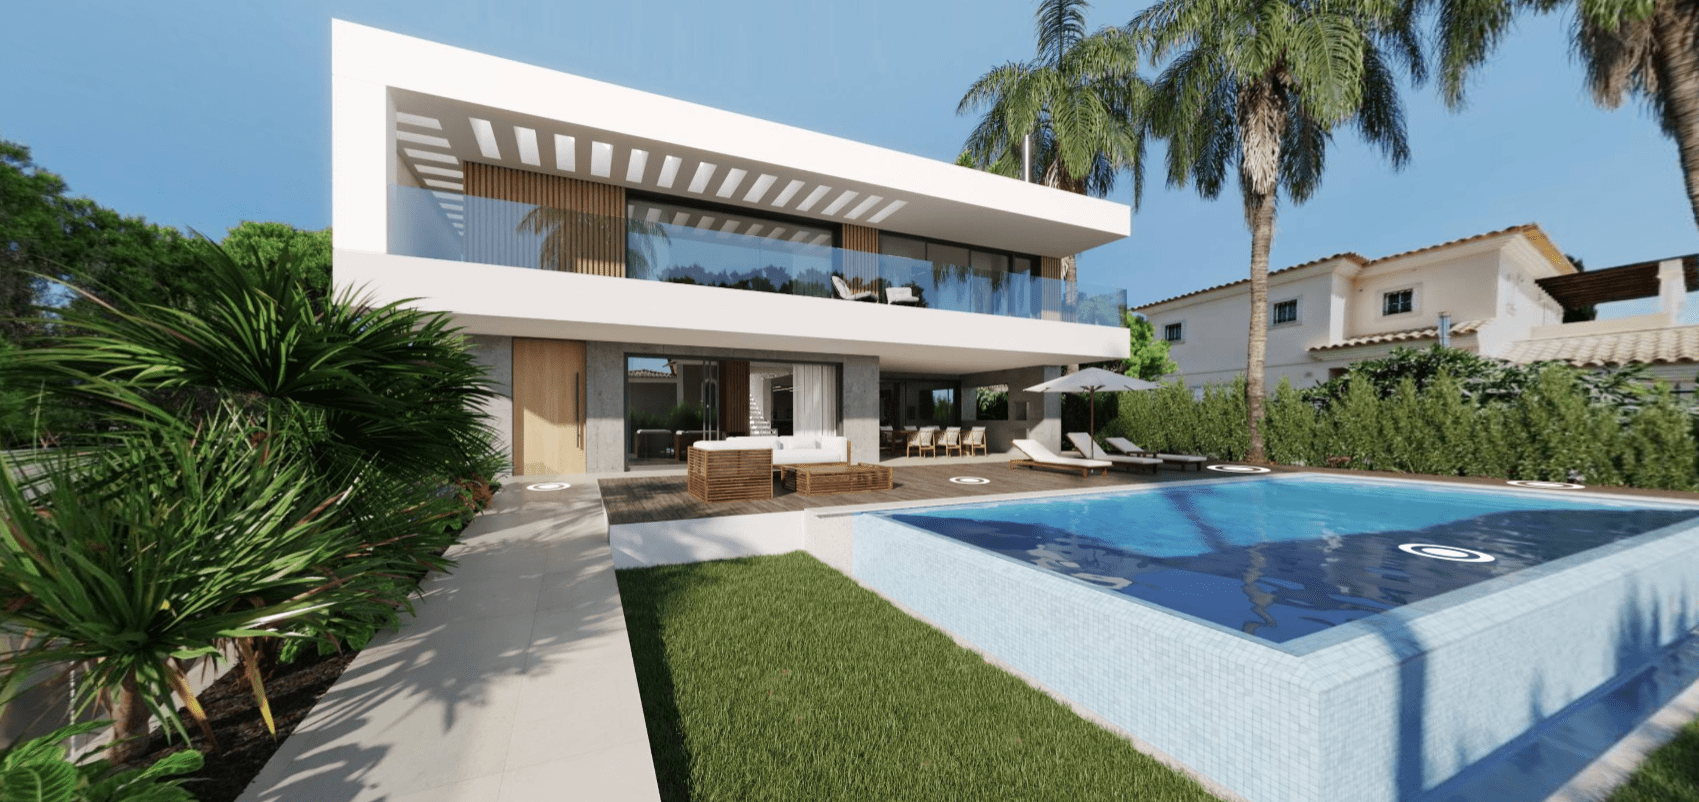 Detached villa on the outskirts of Quinta do Lago